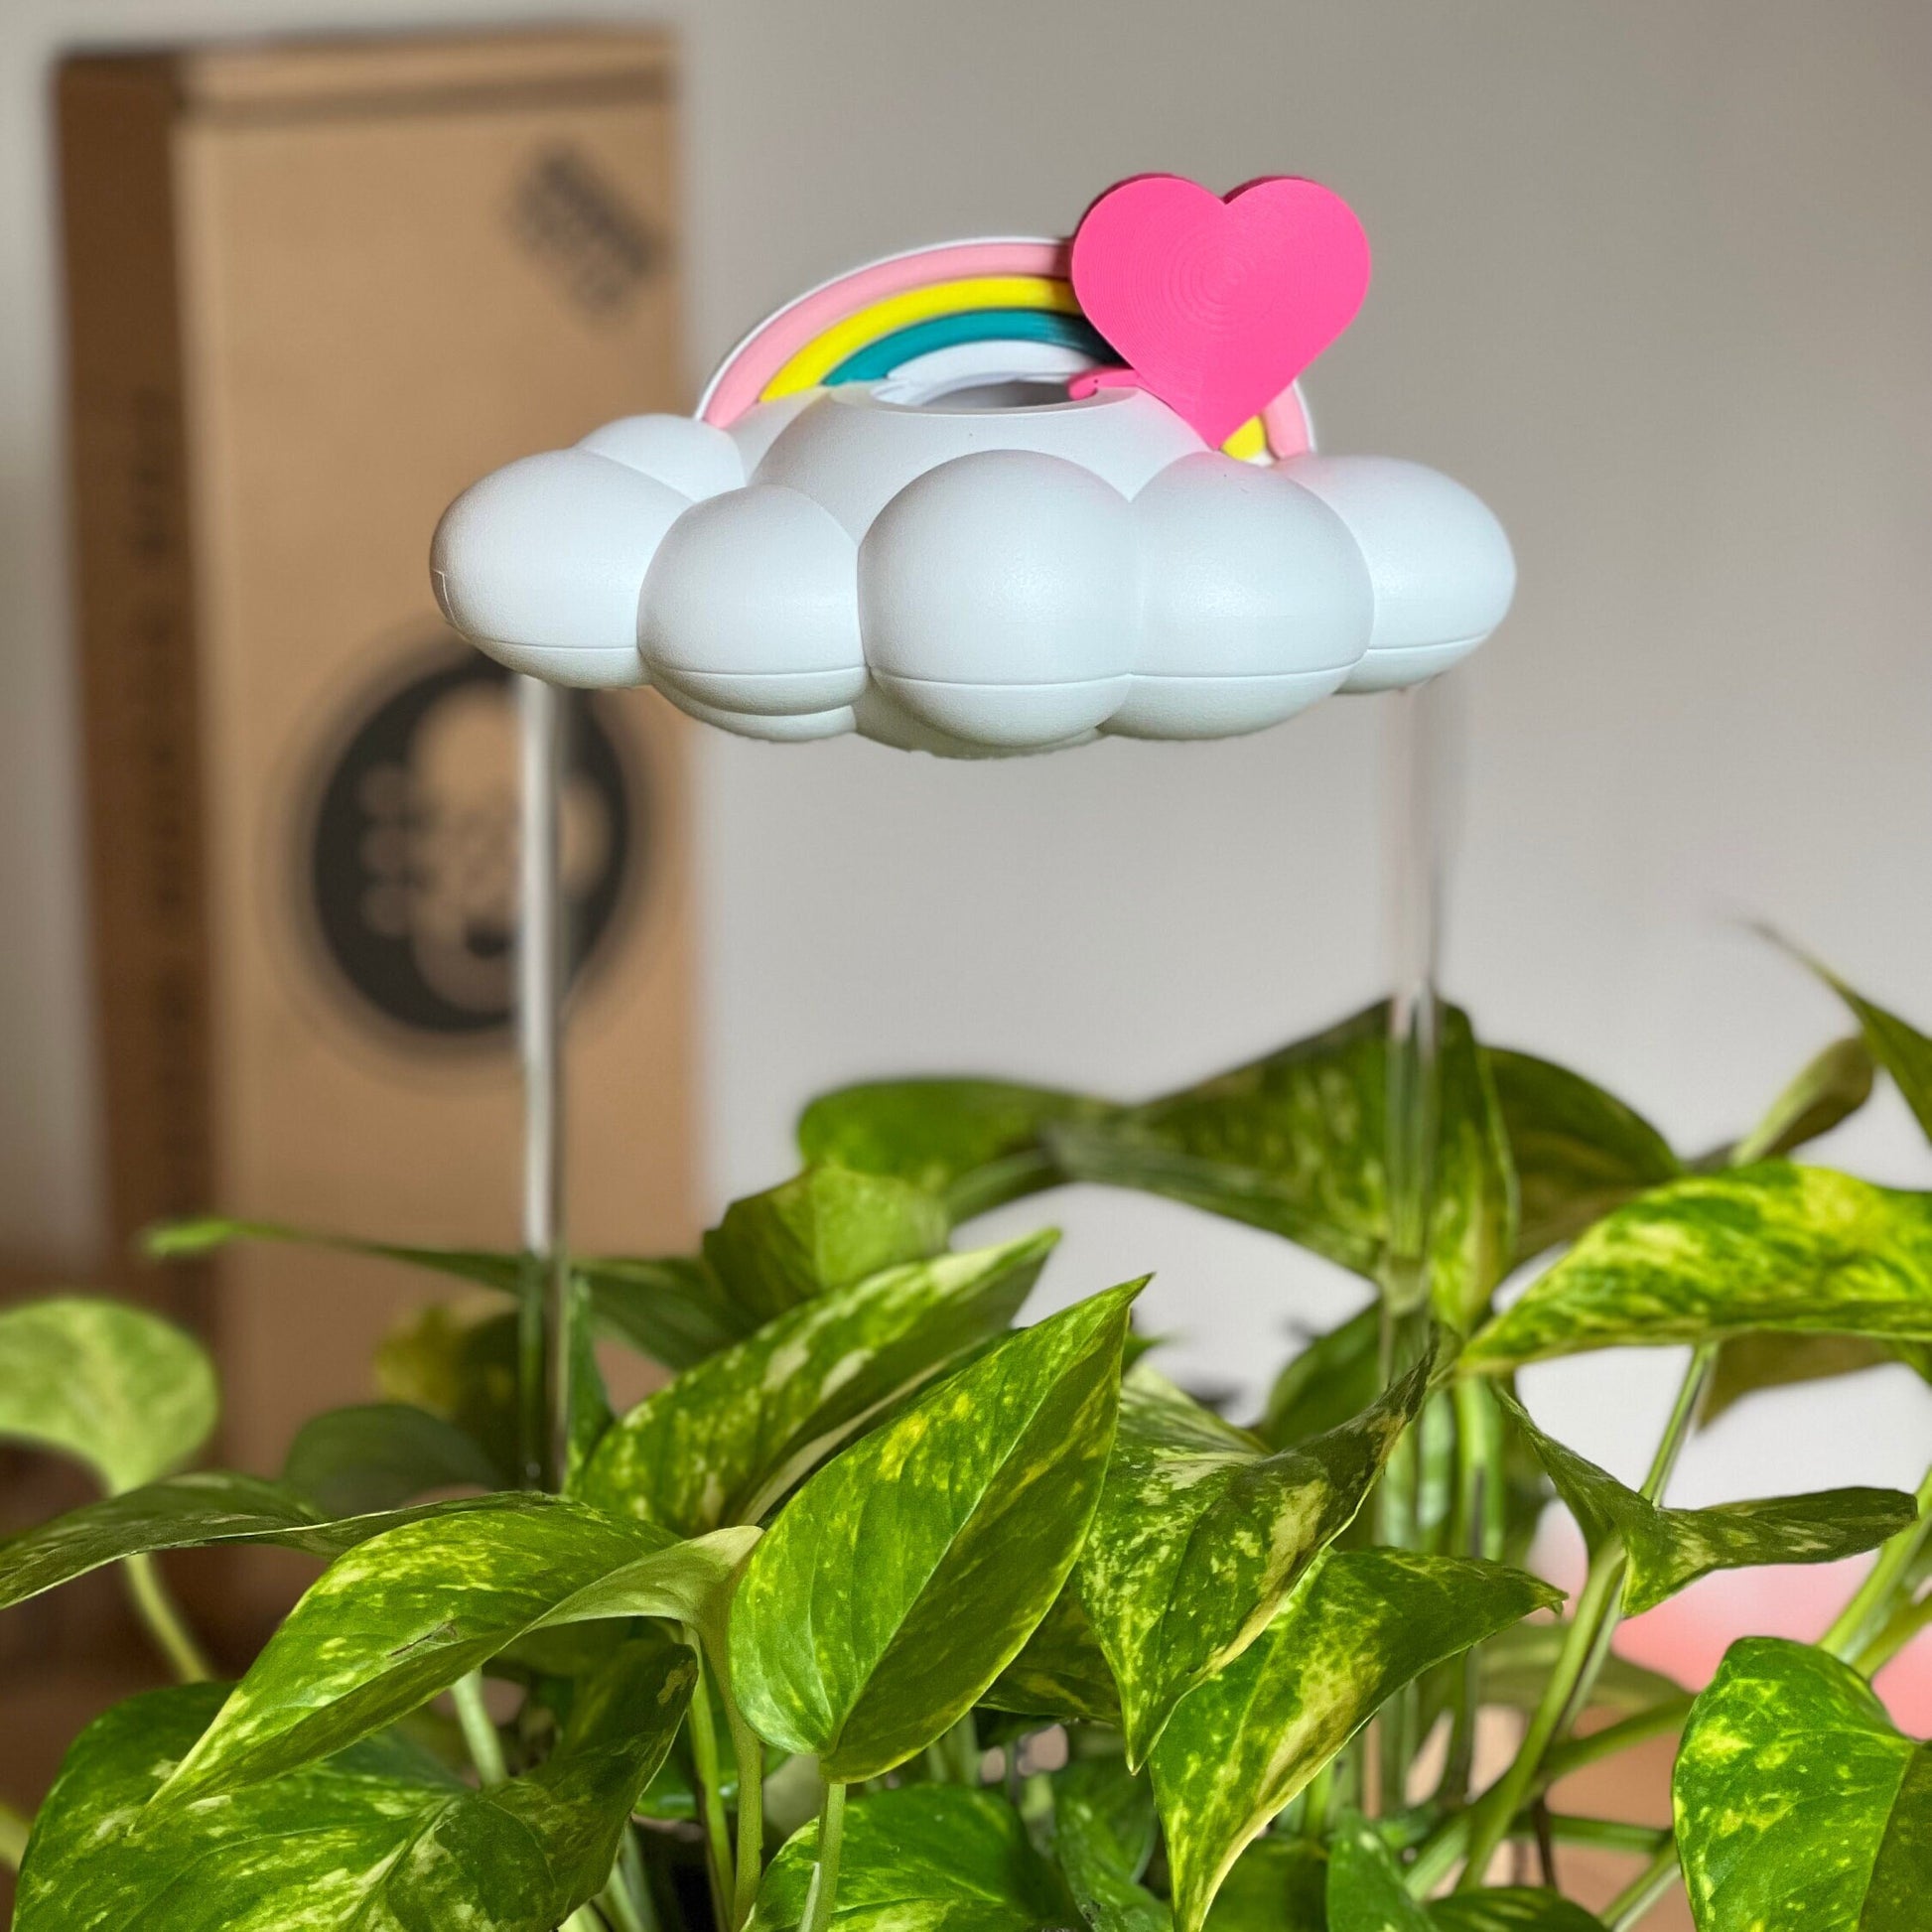 Original Dripping Rain Cloud with Pink Heart and pastel rainbow charms